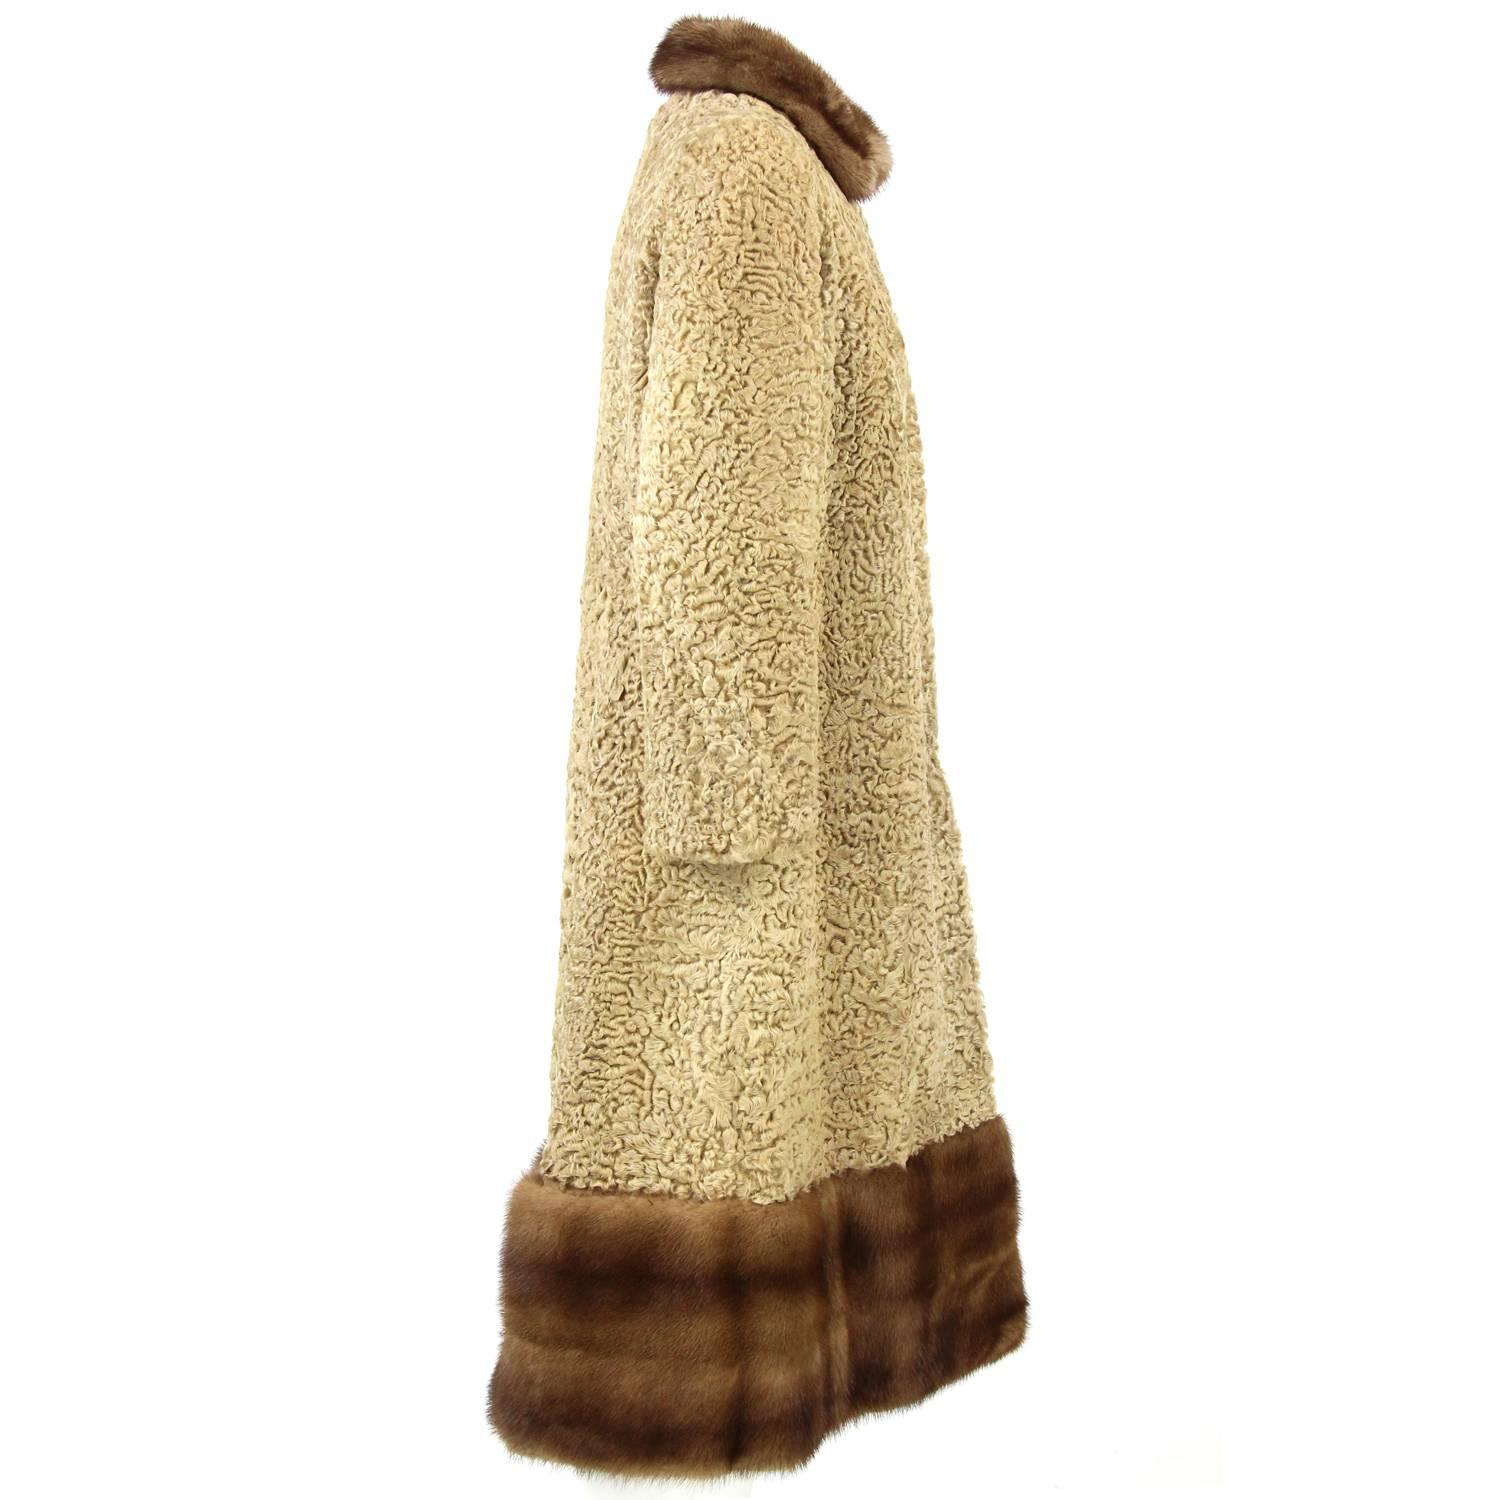 Soft flared tailoring beige coat in persian lamb trimmed with brown mink fur on the collar and on the bottom. It features two hook closures on the front, a button on the collar and one internal pocket. Lined. Excellent conditions.
Height: 115